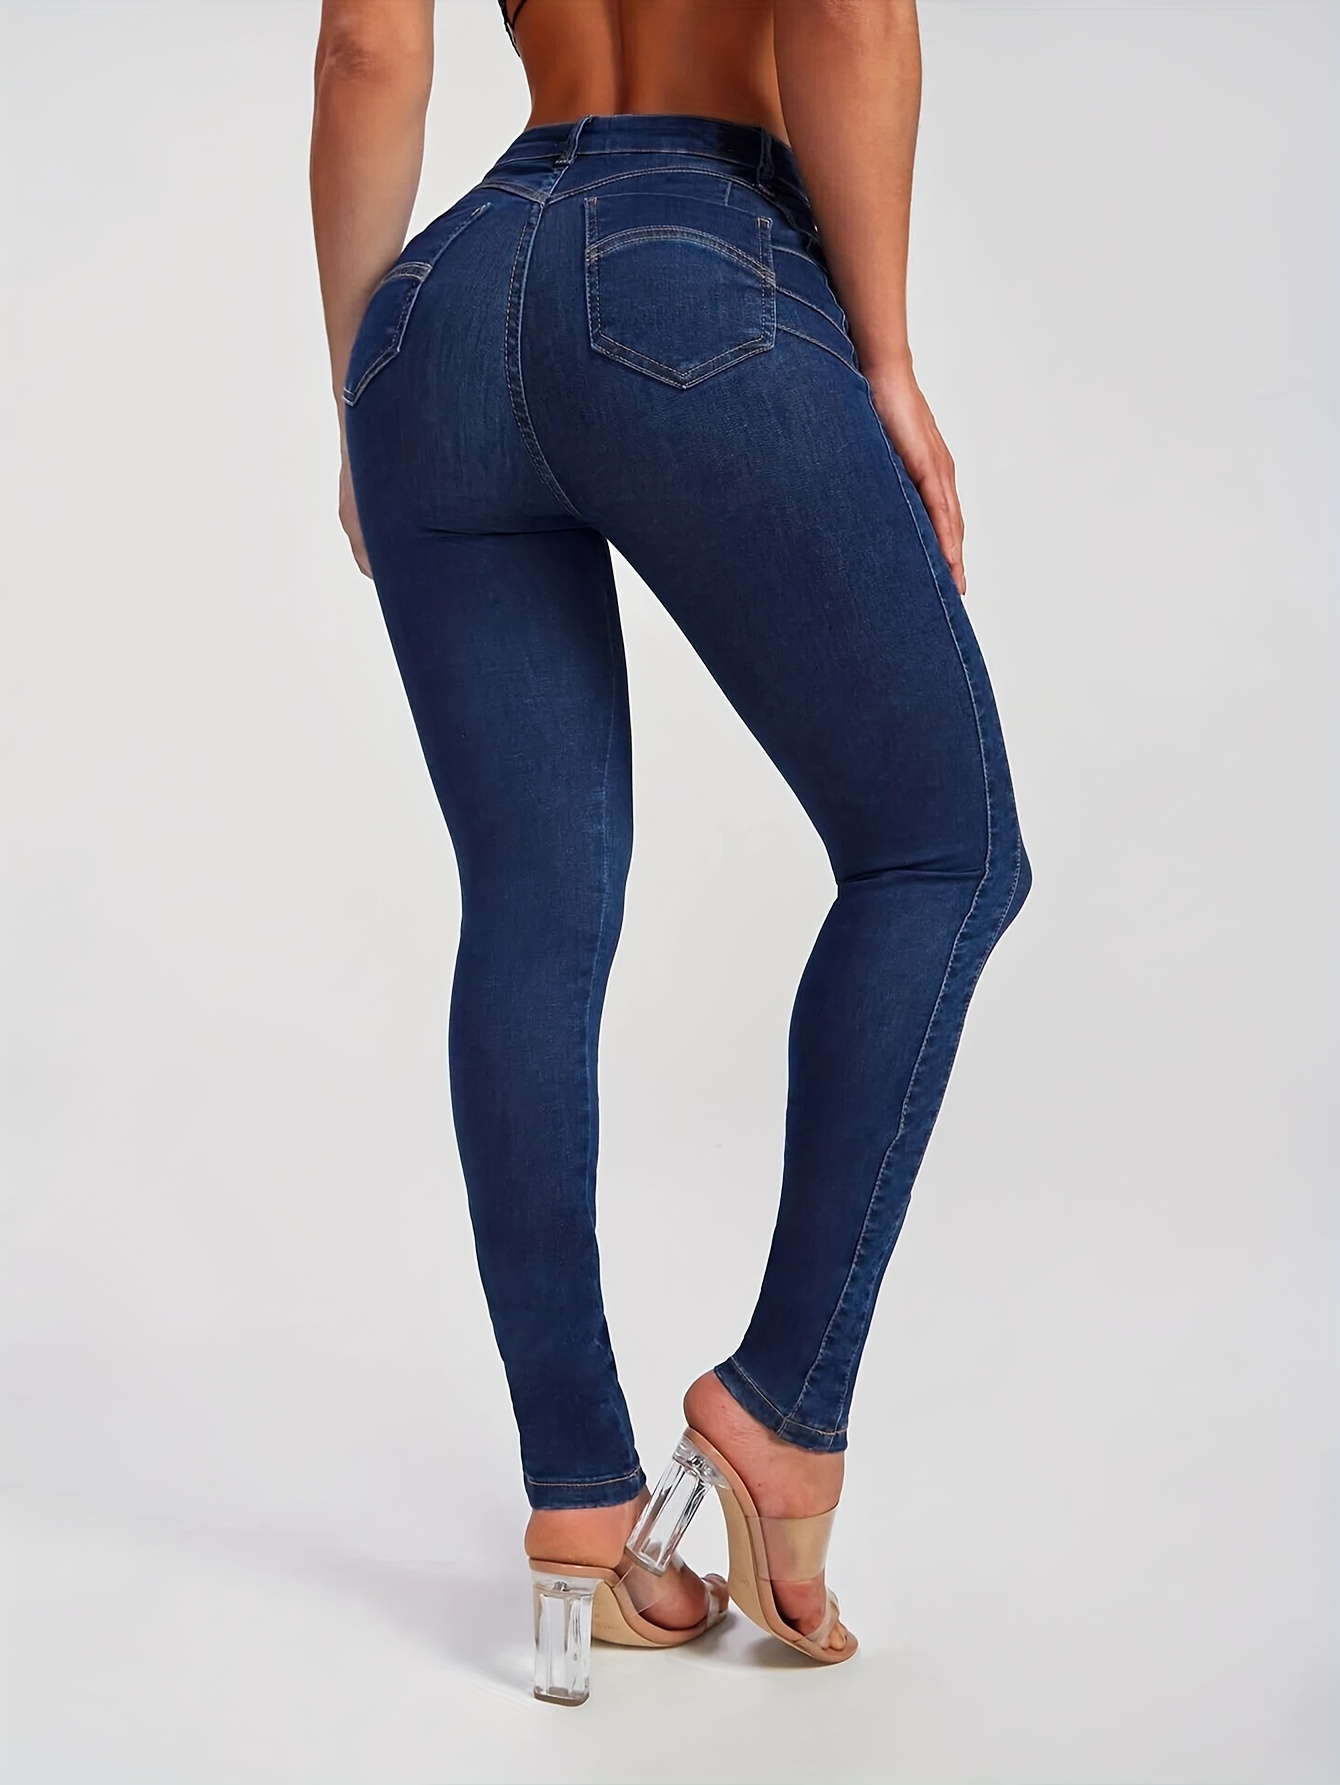 Womens High Waisted Skinny Stretch Butt Lifting Jeans Slim Fit Classic  Denim Pants Tapered Leg Booty Lifting Jeans